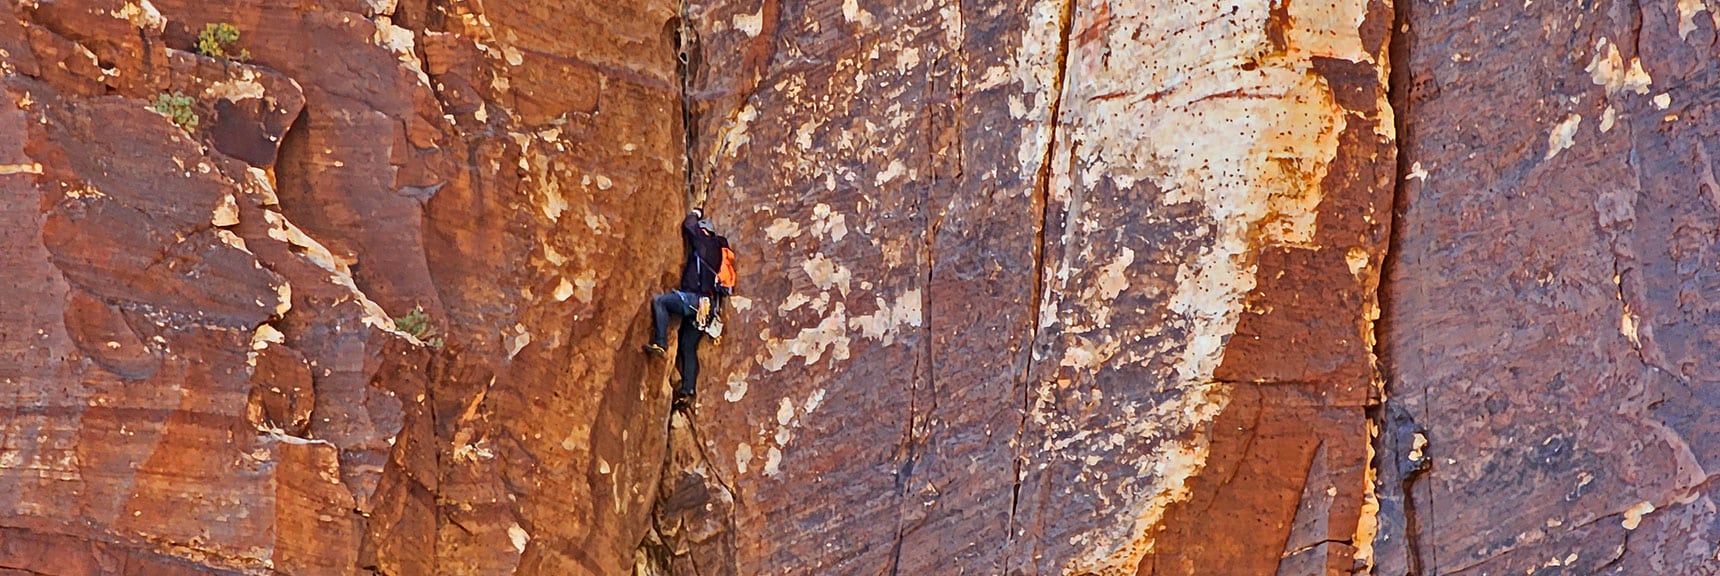 Free-Climbing an Impossibly High Vertical Crack. Every Move Carefully Executed. | Rock Climber Observations | Pine Creek Canyon | Rainbow Mountain Wilderness, Nevada